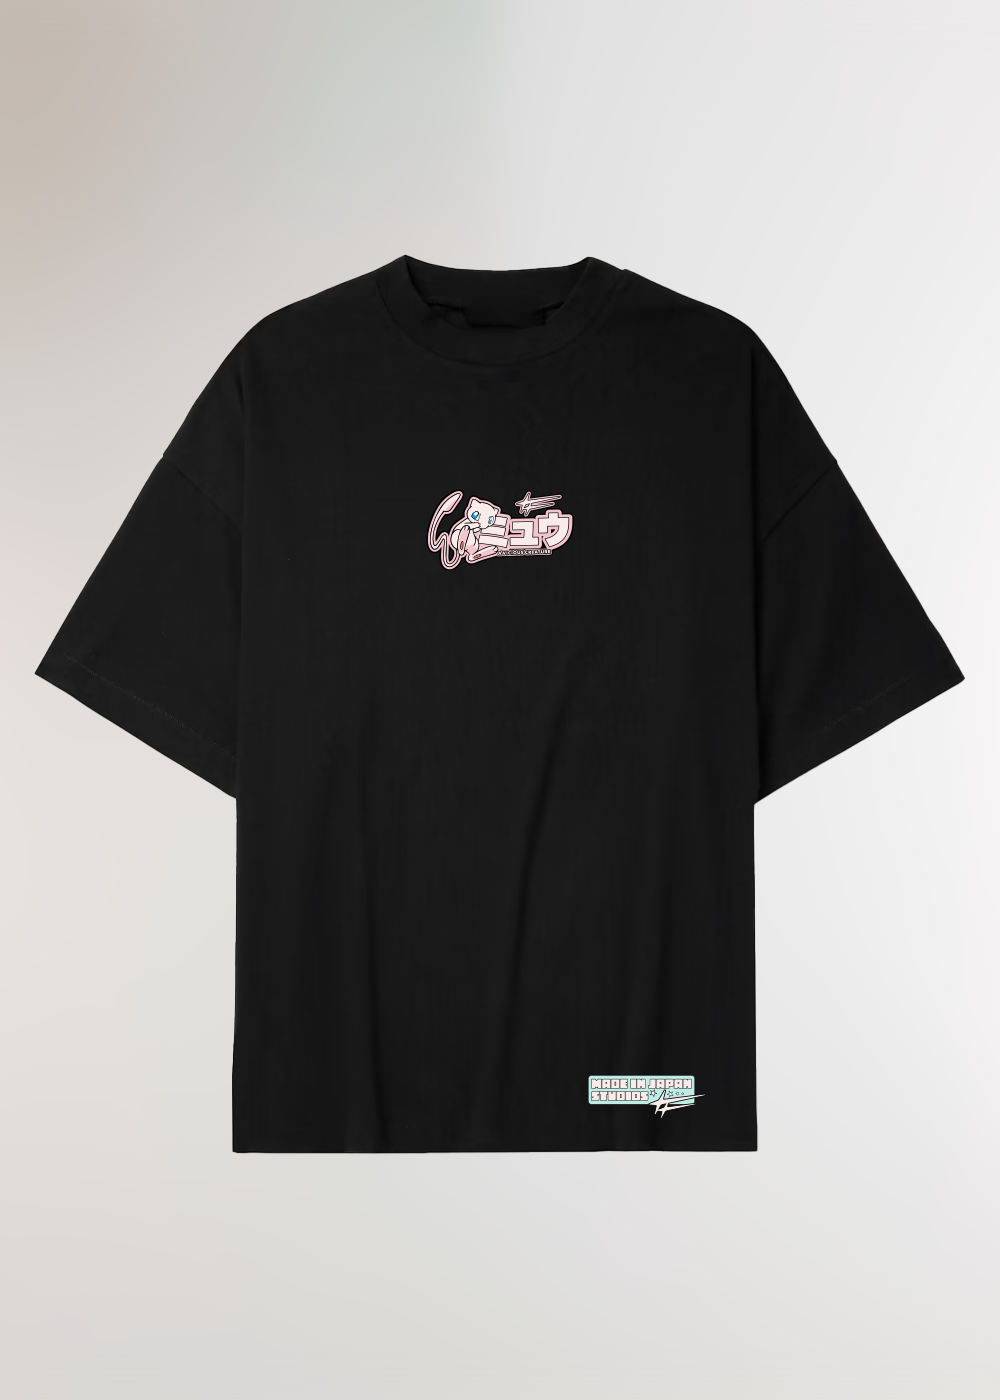 MADE IN JAPAN - VICIOUS CREATURE® BLACK T-SHIRT